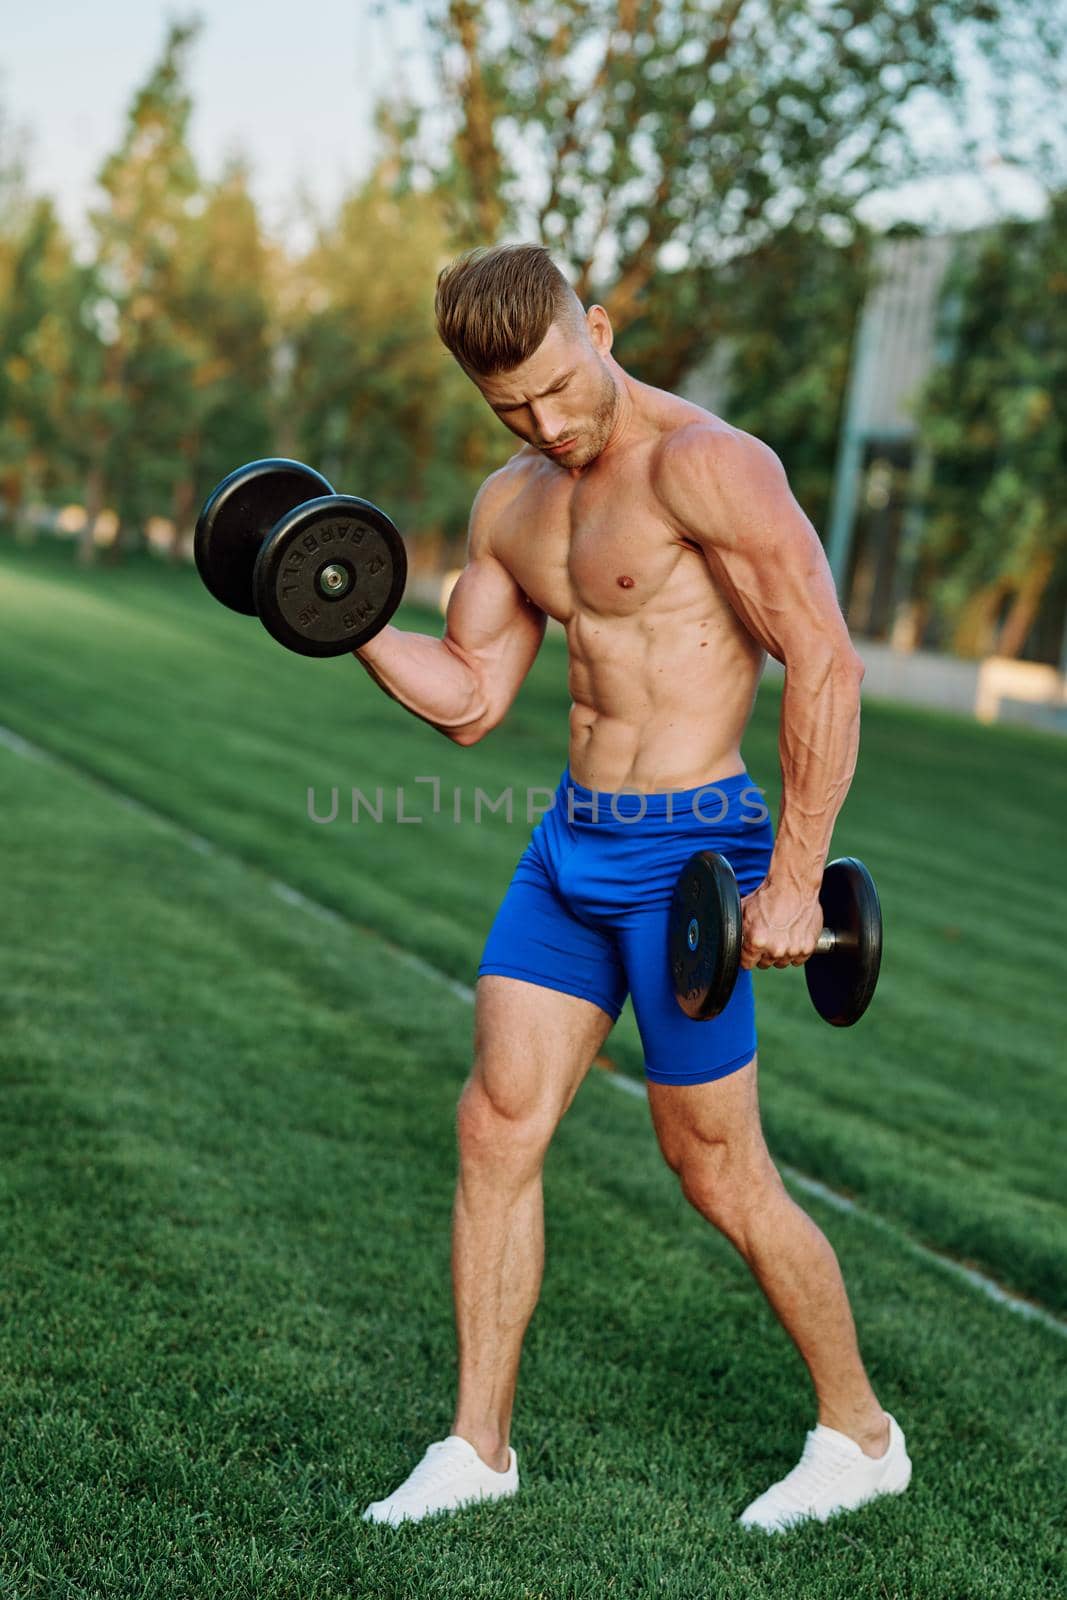 sports man athletic workout exercise motivation fitness. High quality photo